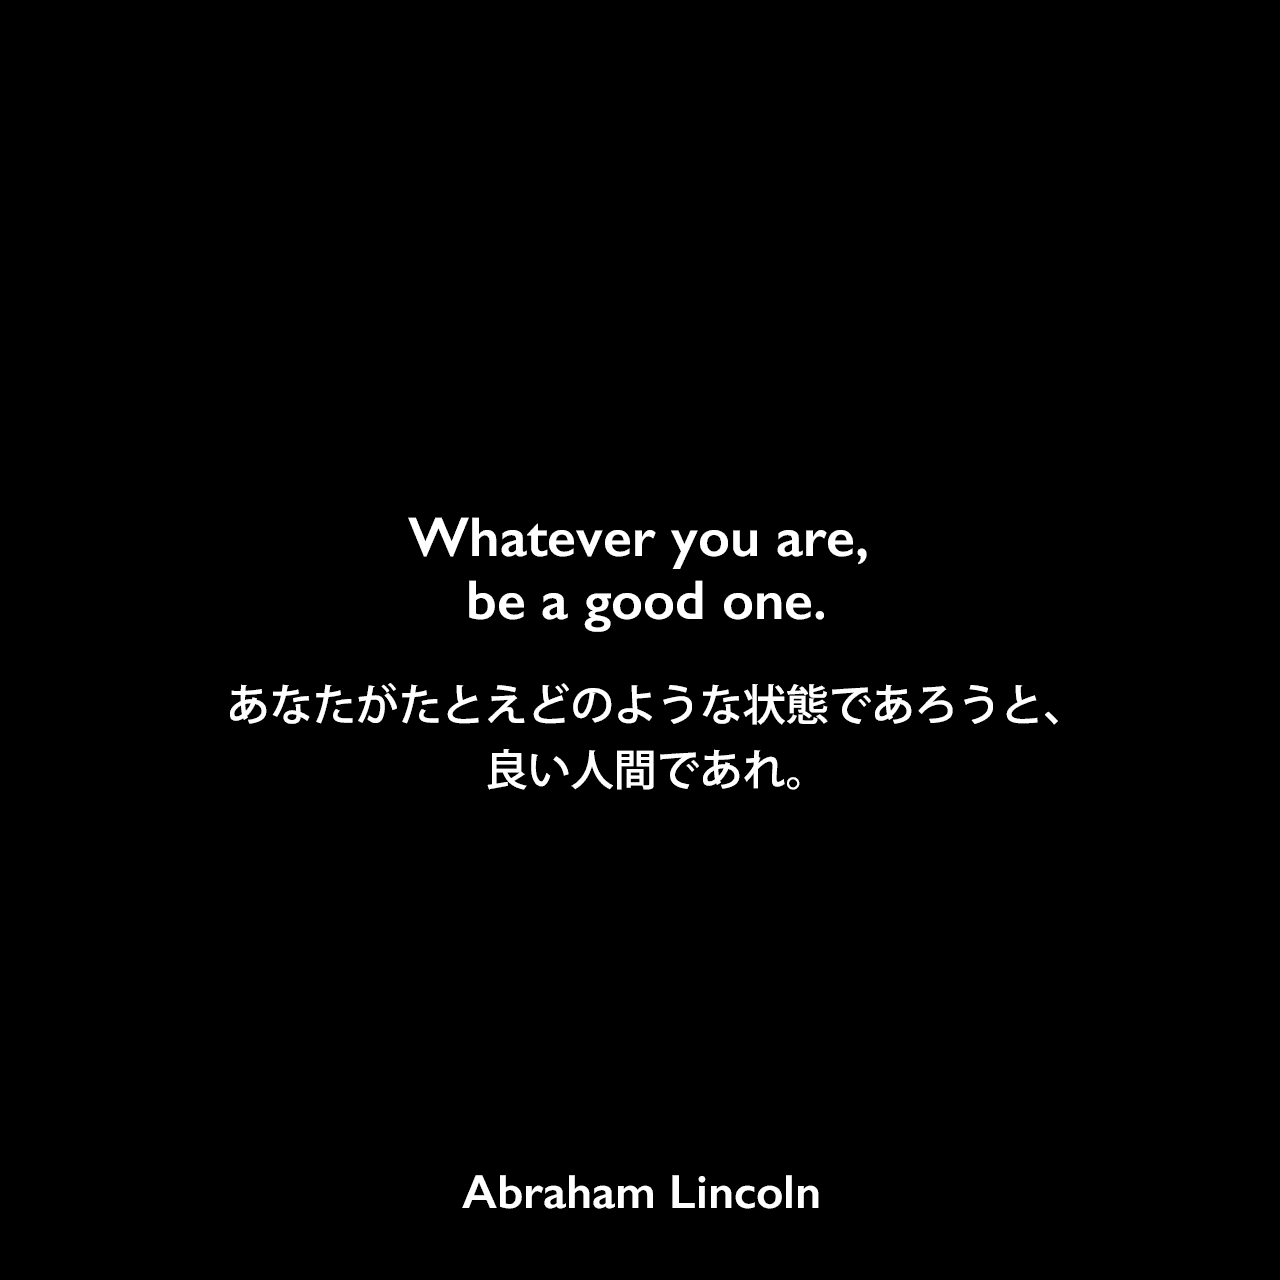 Whatever you are, be a good one.あなたがたとえどのような状態であろうと、良い人間であれ。Abraham Lincoln